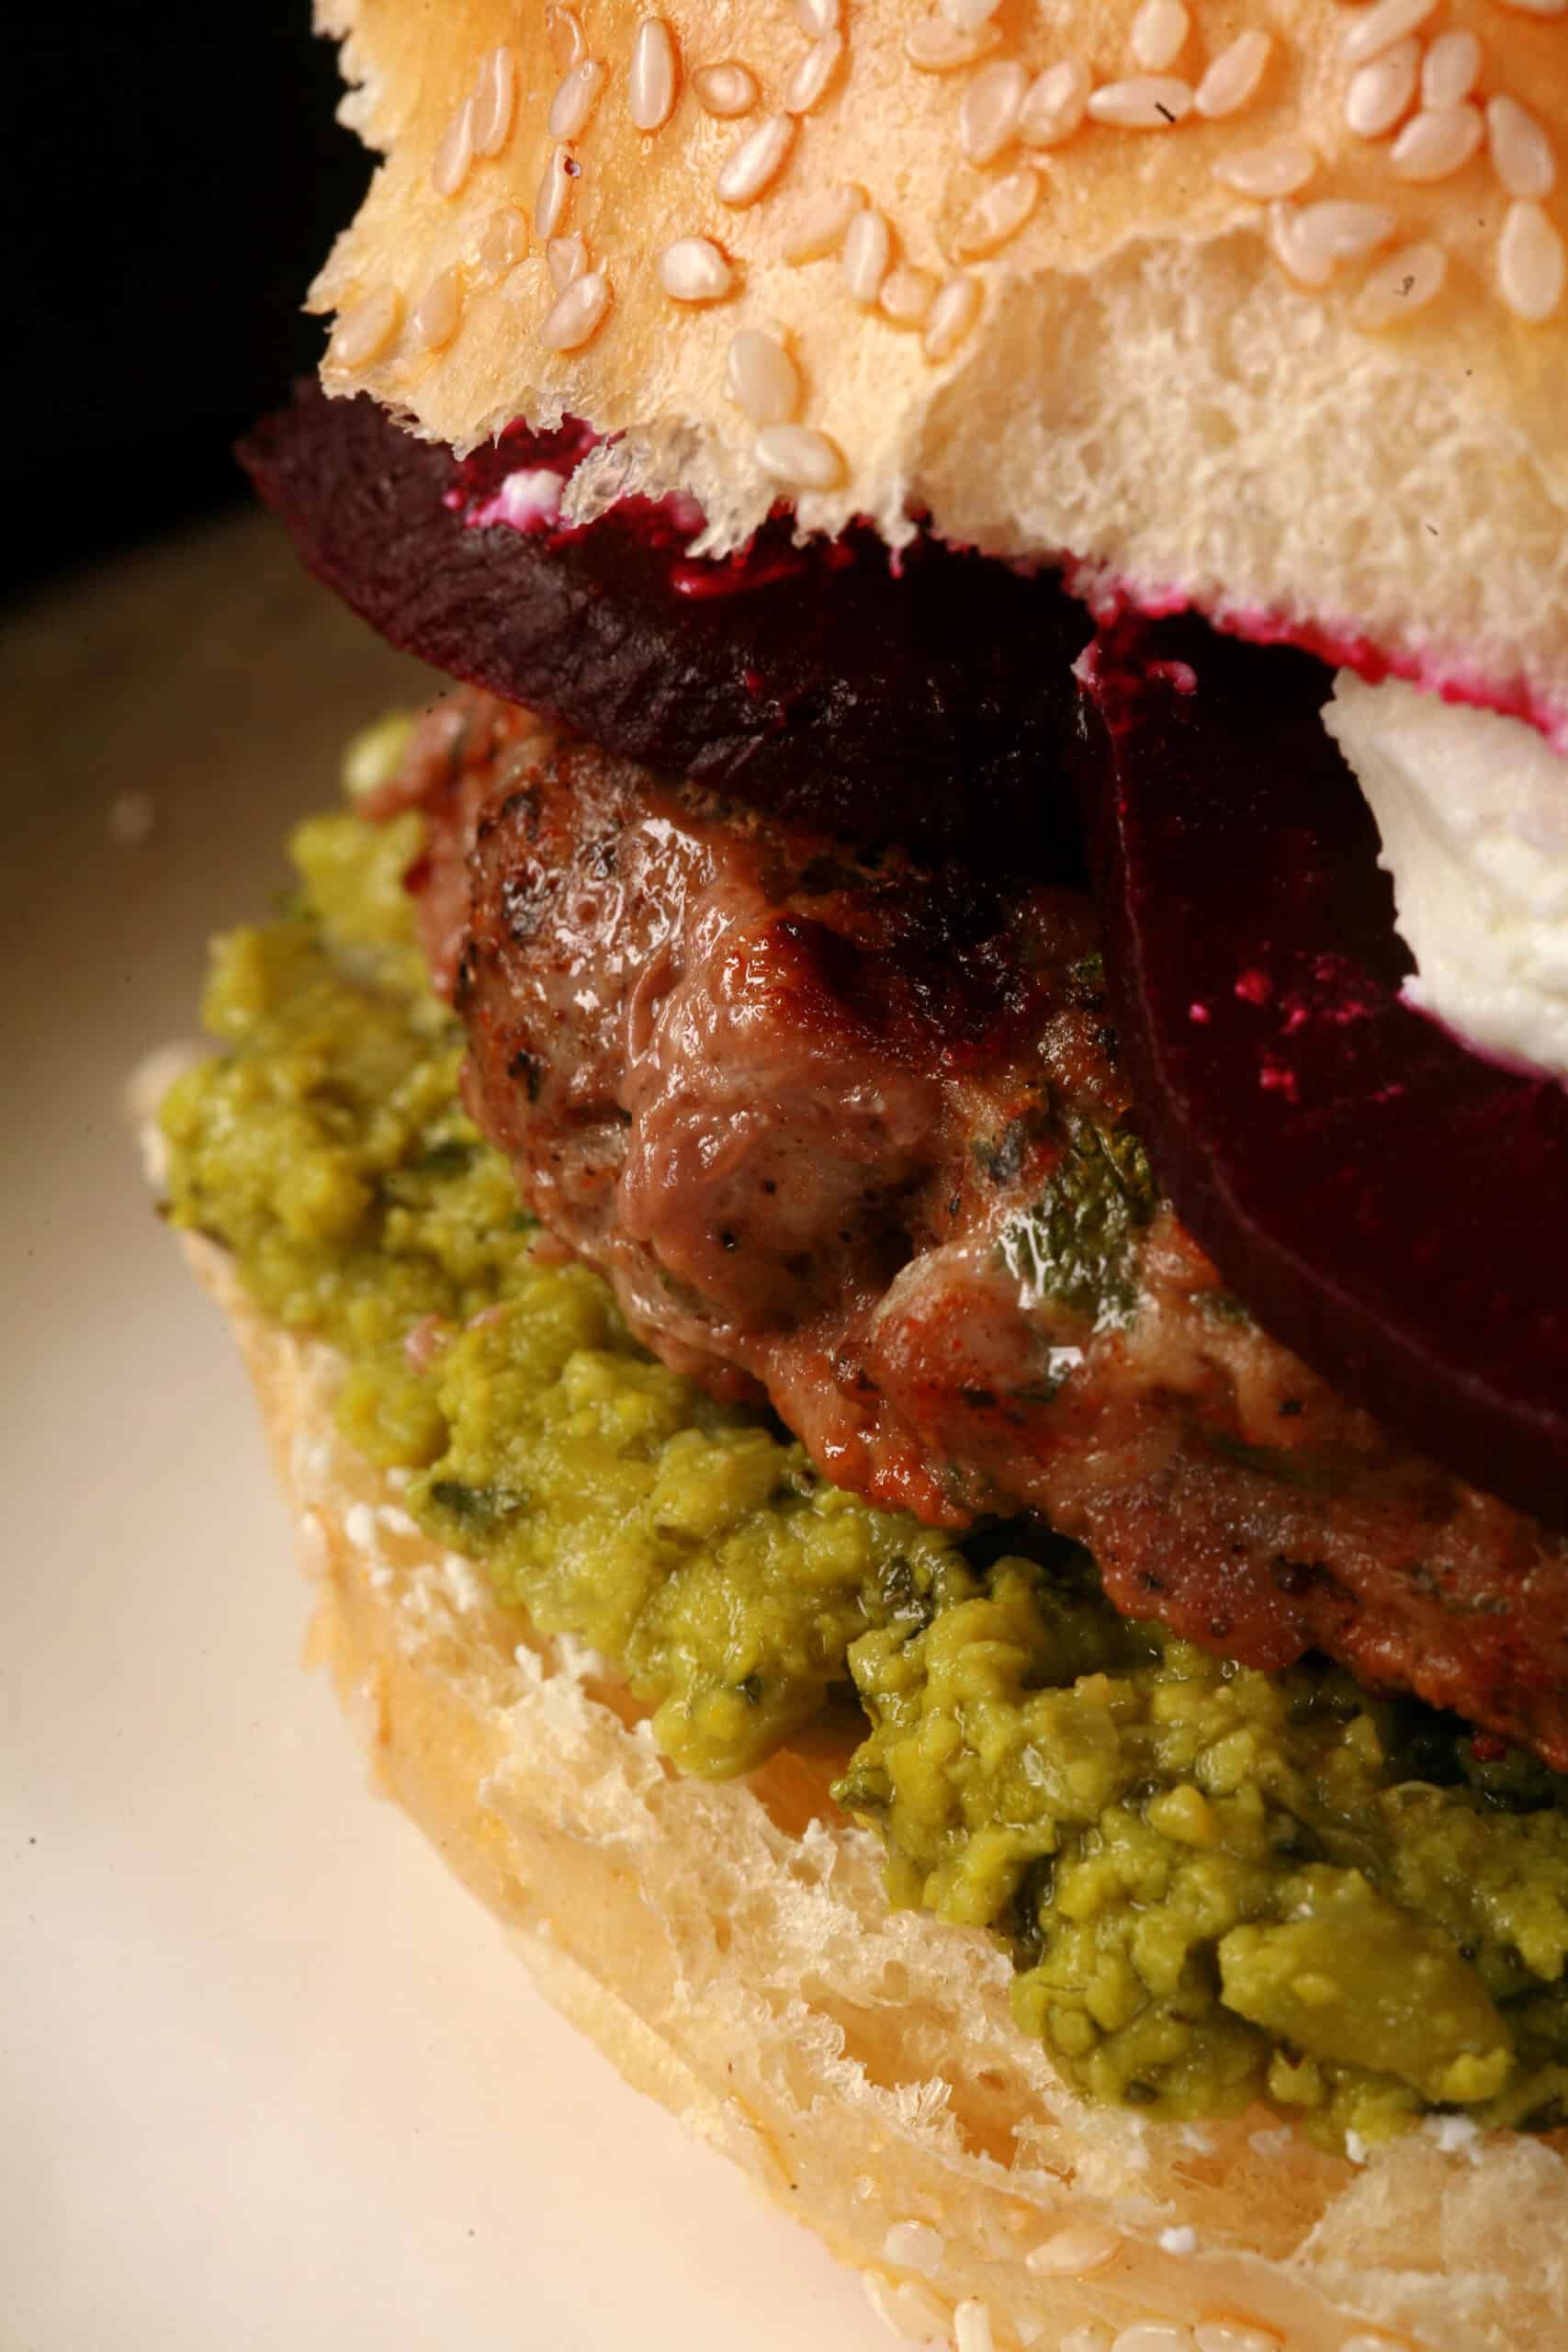 A close up photo of a moroccan spiced lamb burger with pea hummus, goat cheese, and roasted beets.